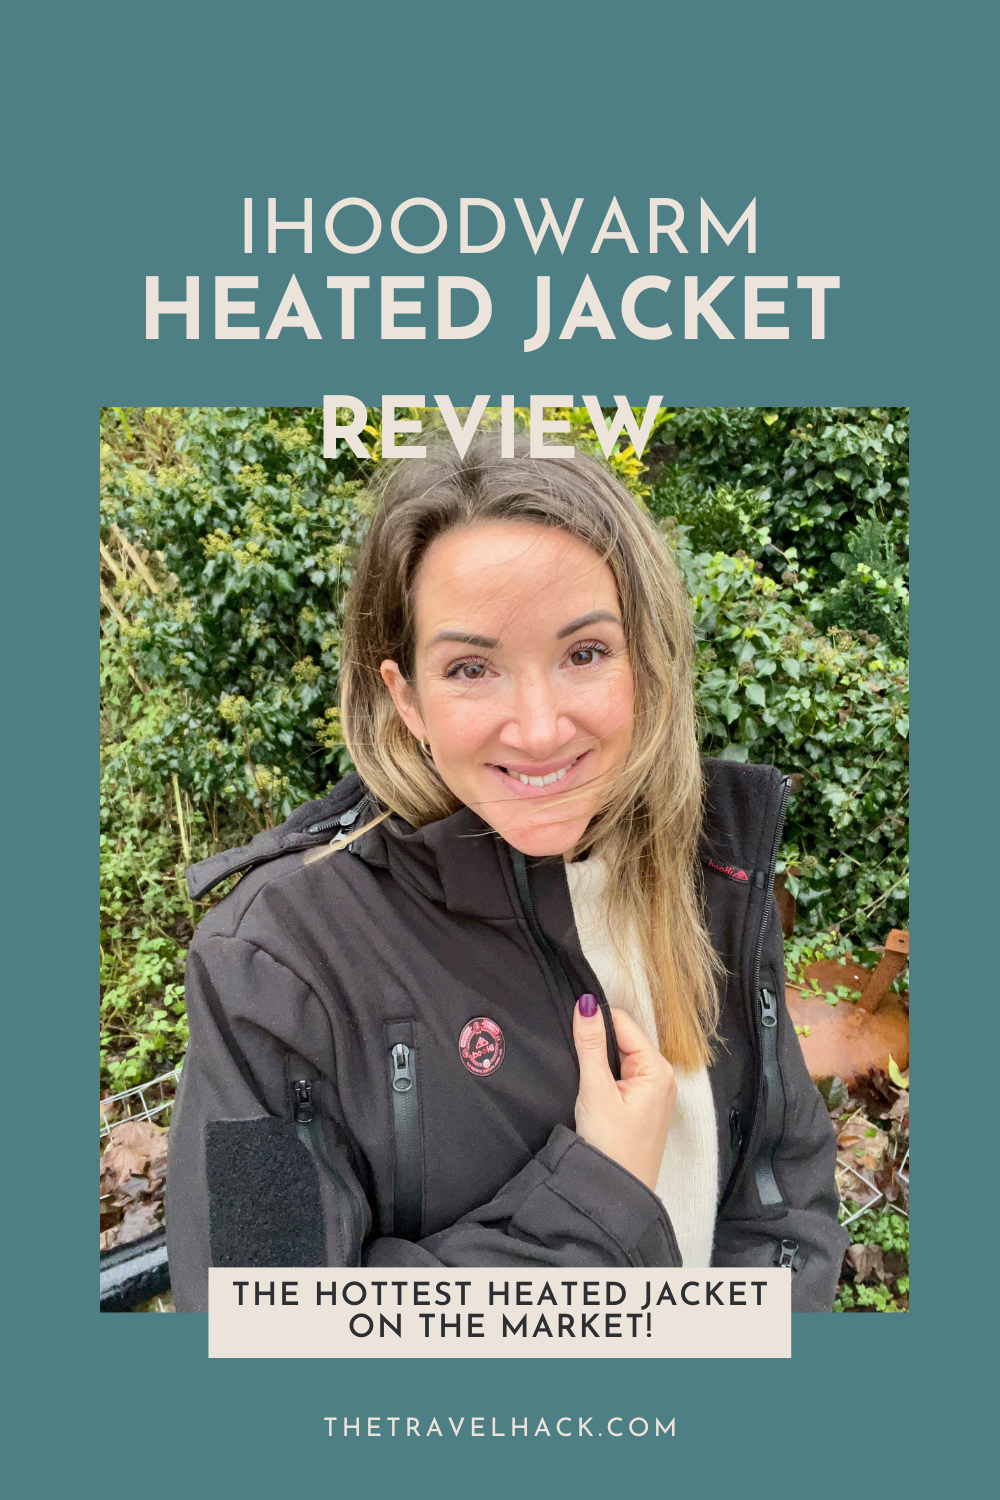 iHoodwarm Heated Jacket Review: The hottest heated jacket on the market